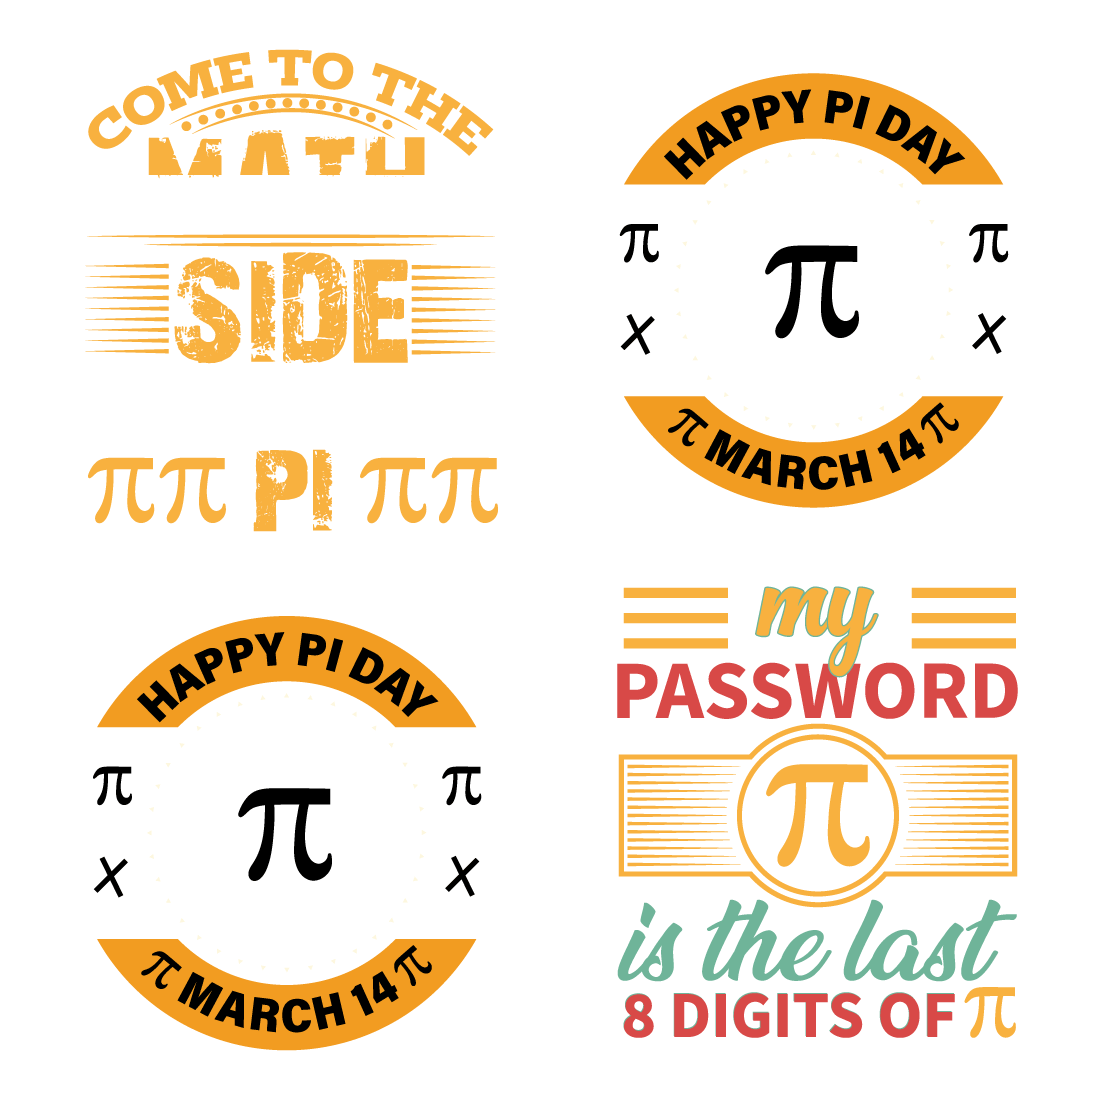 Pi Day t-shirt design preview image.